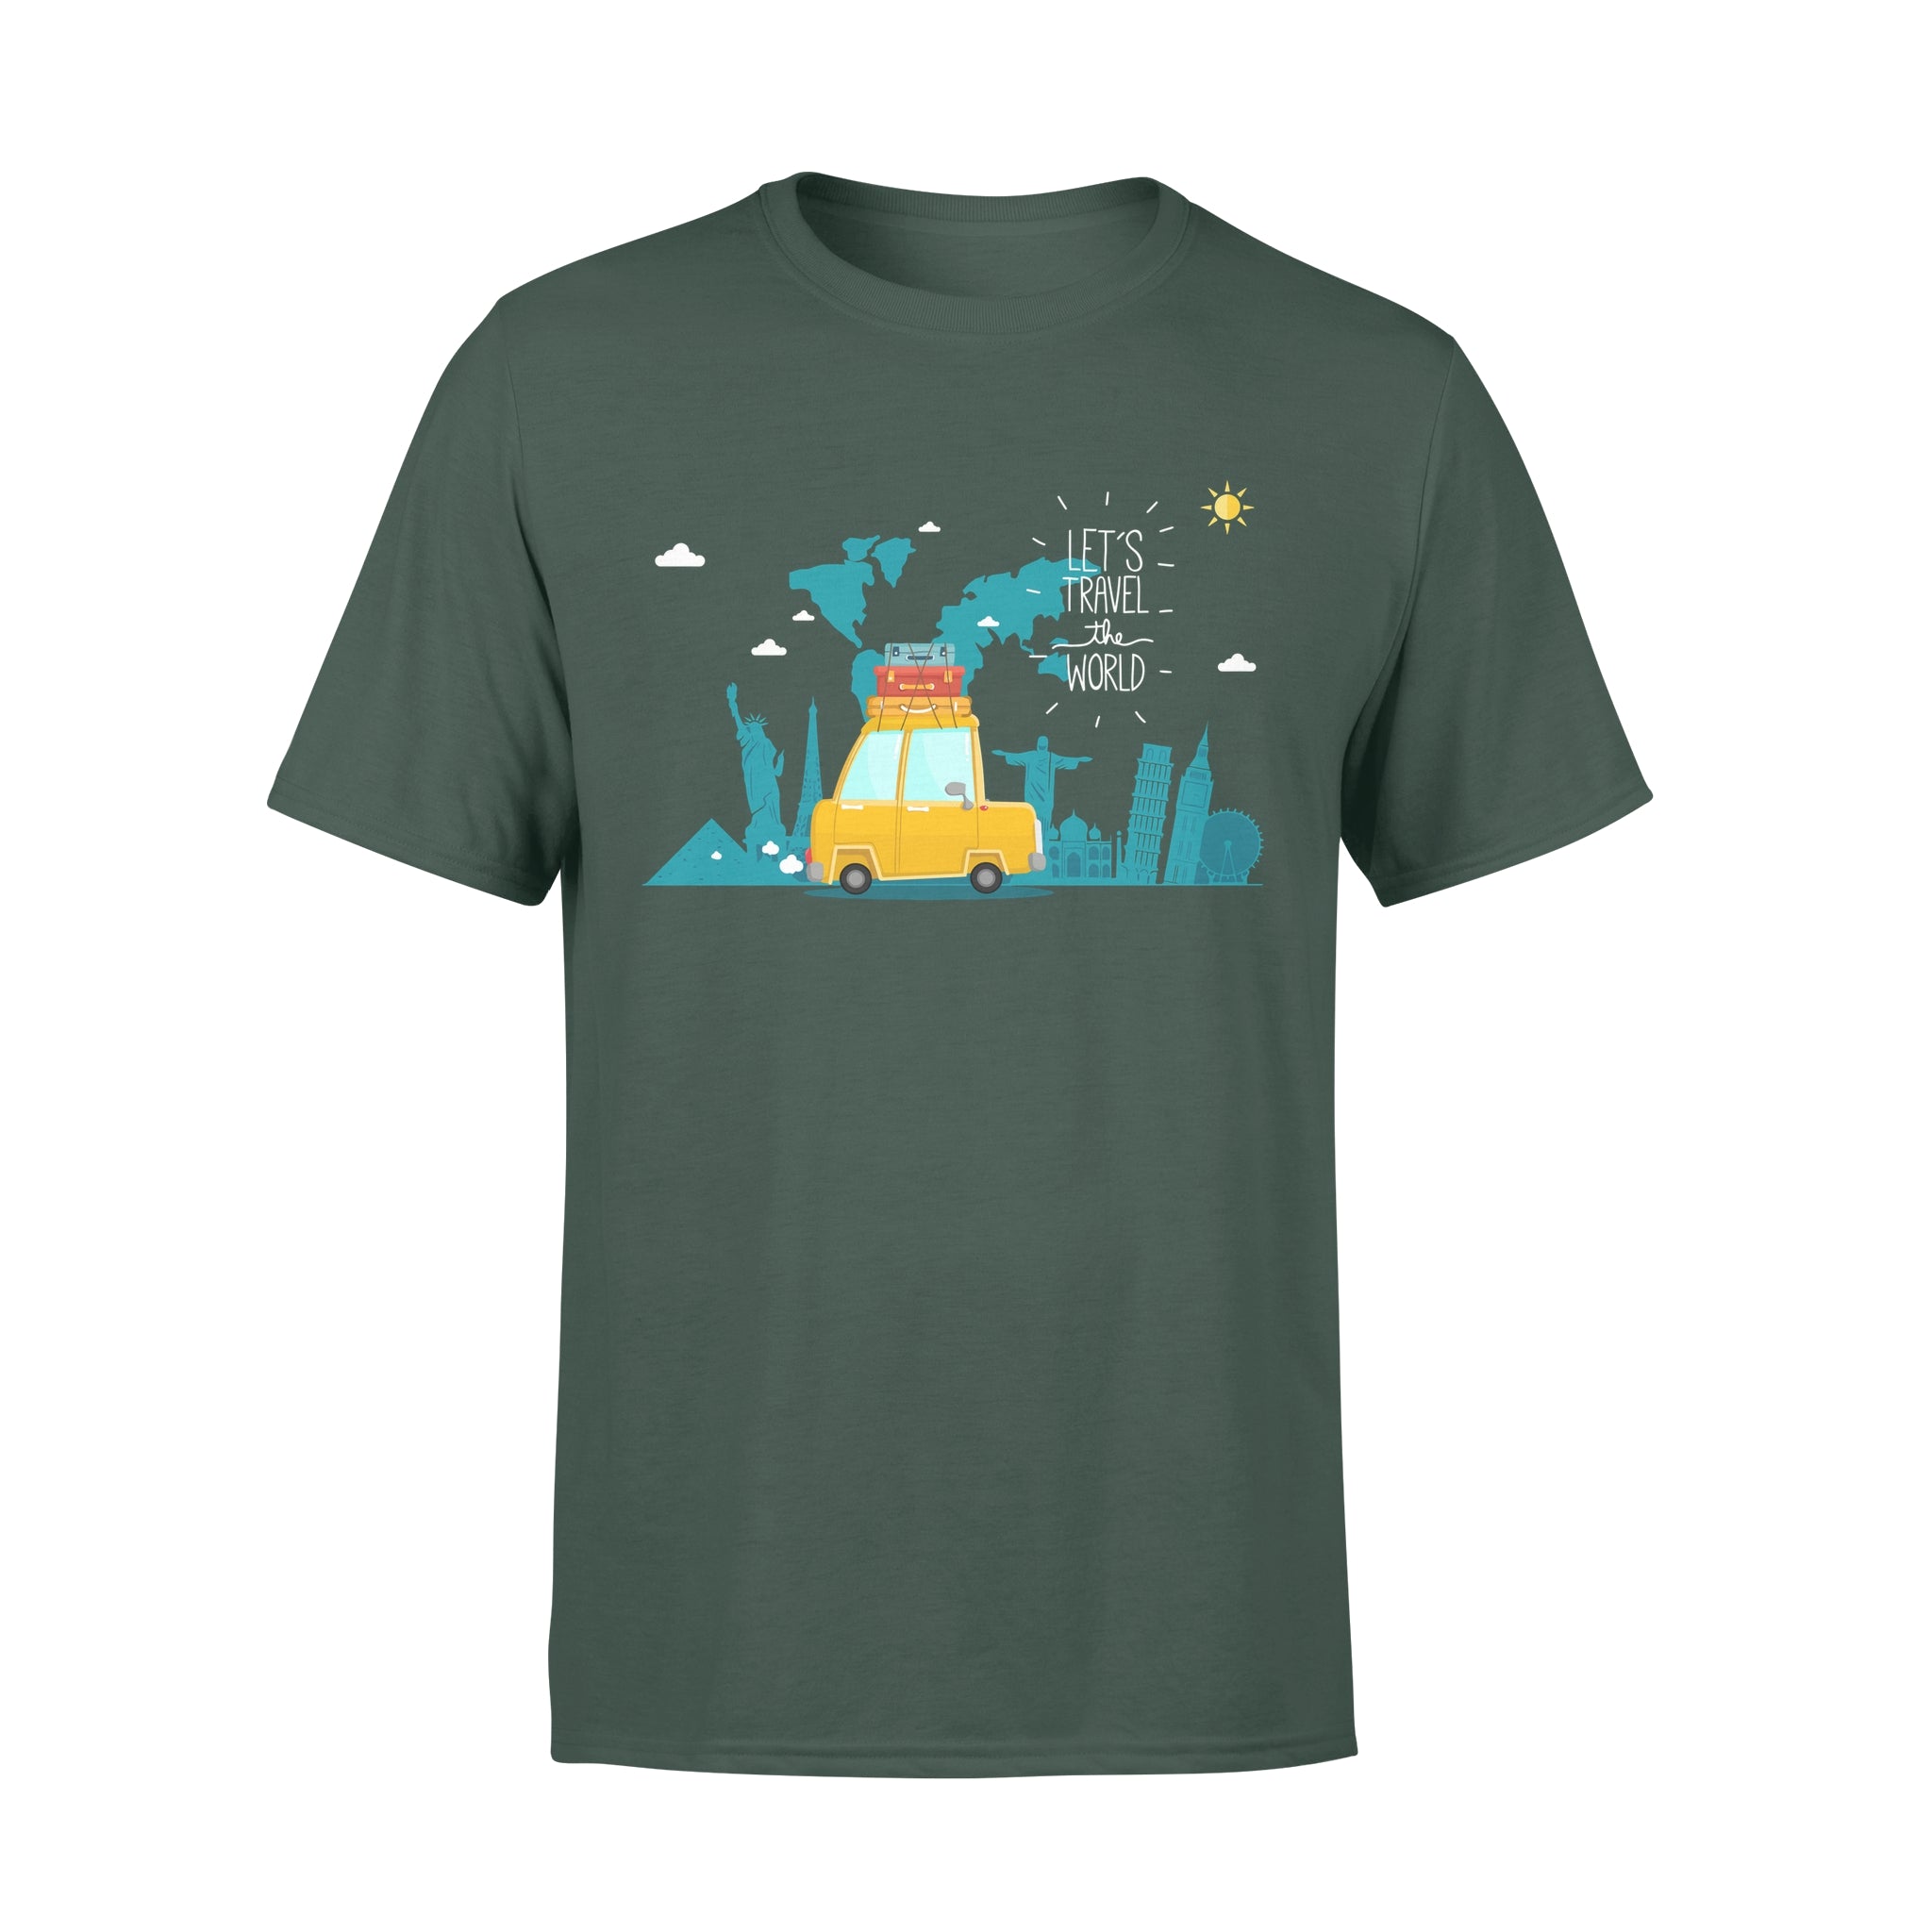 Let's Travel The World -  T-shirt